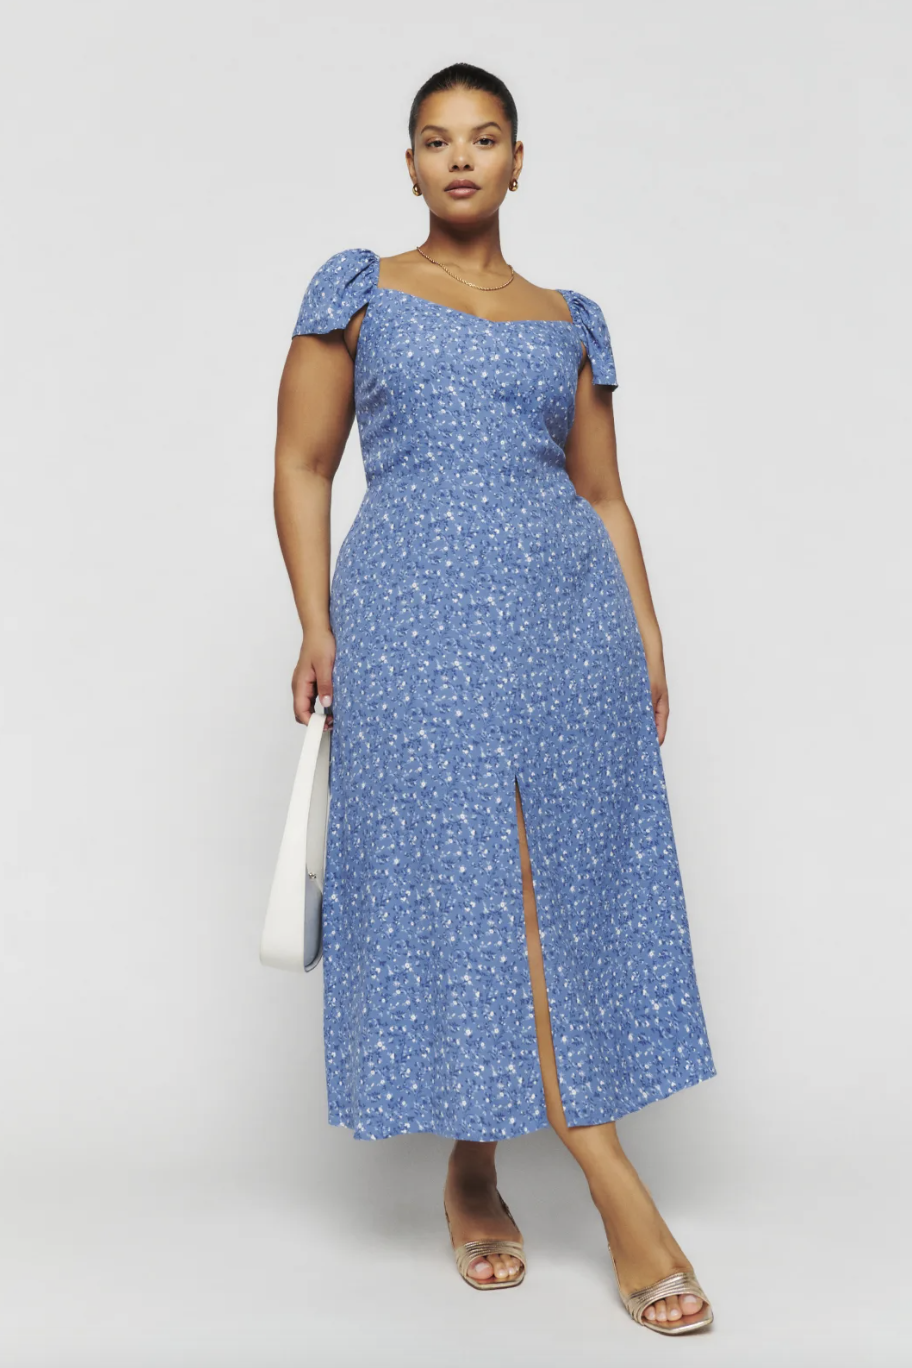 COS Currently Has The Best Selection Of Summer Dresses On The High Street